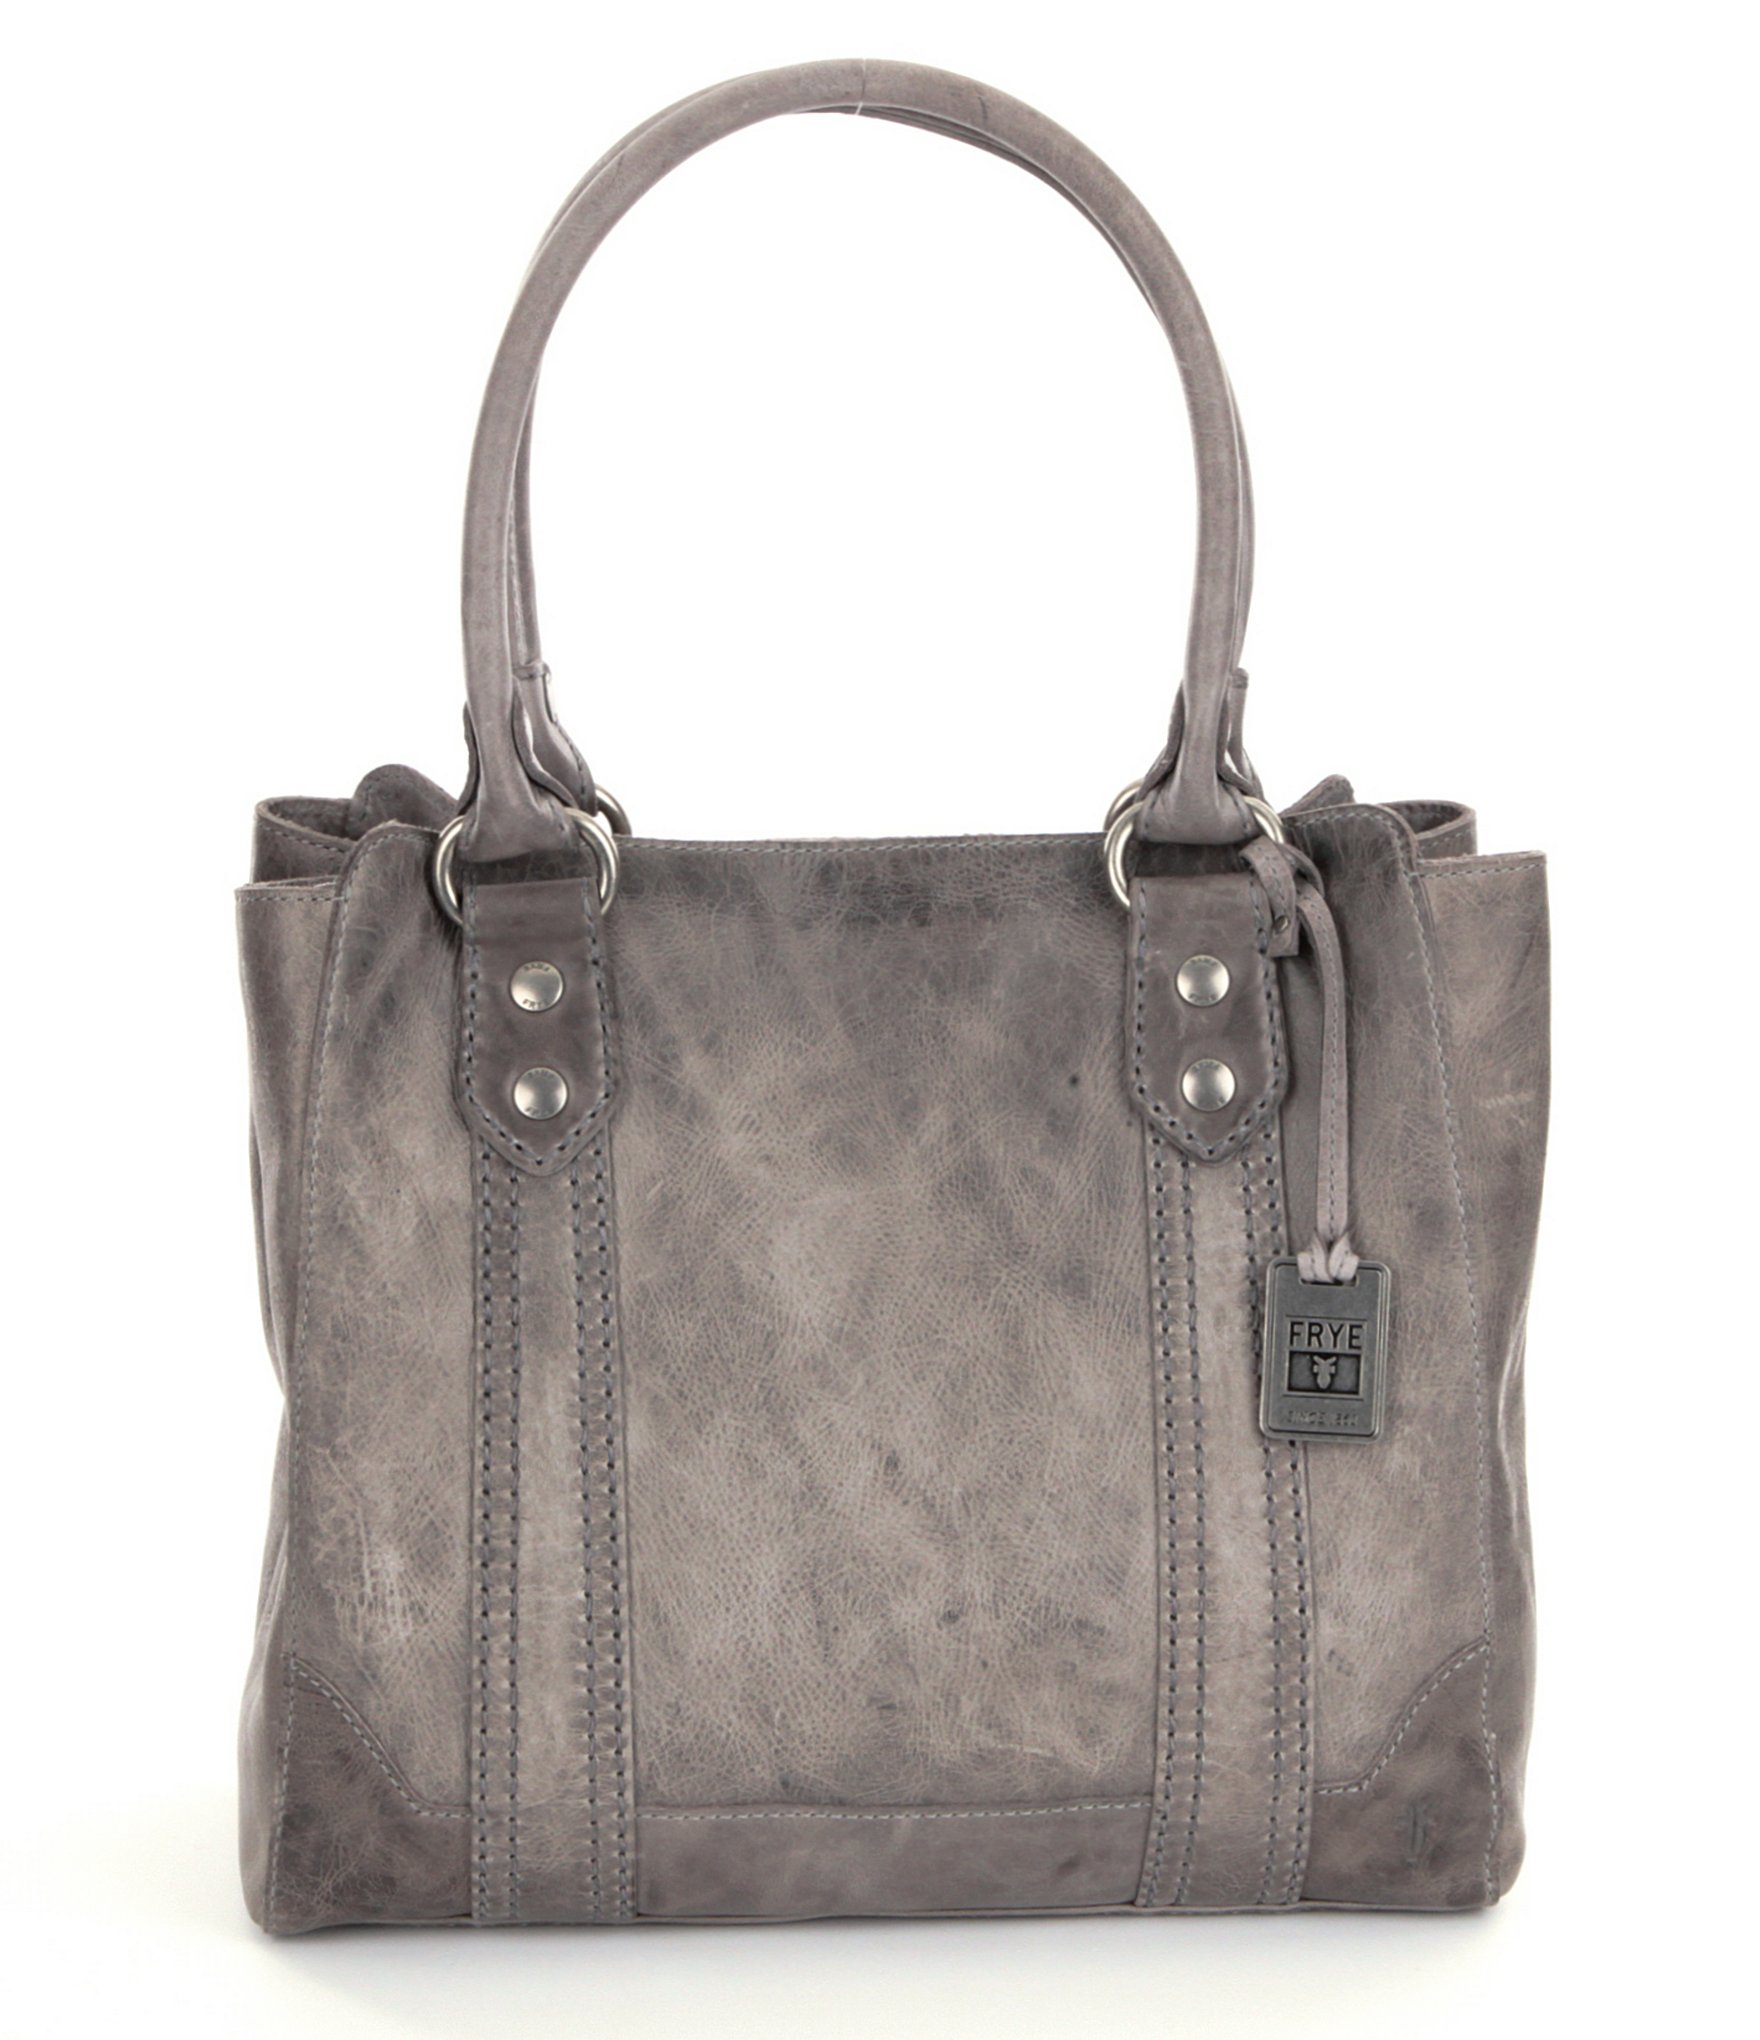 Lyst - Frye Melissa Washed Leather Tote in Gray